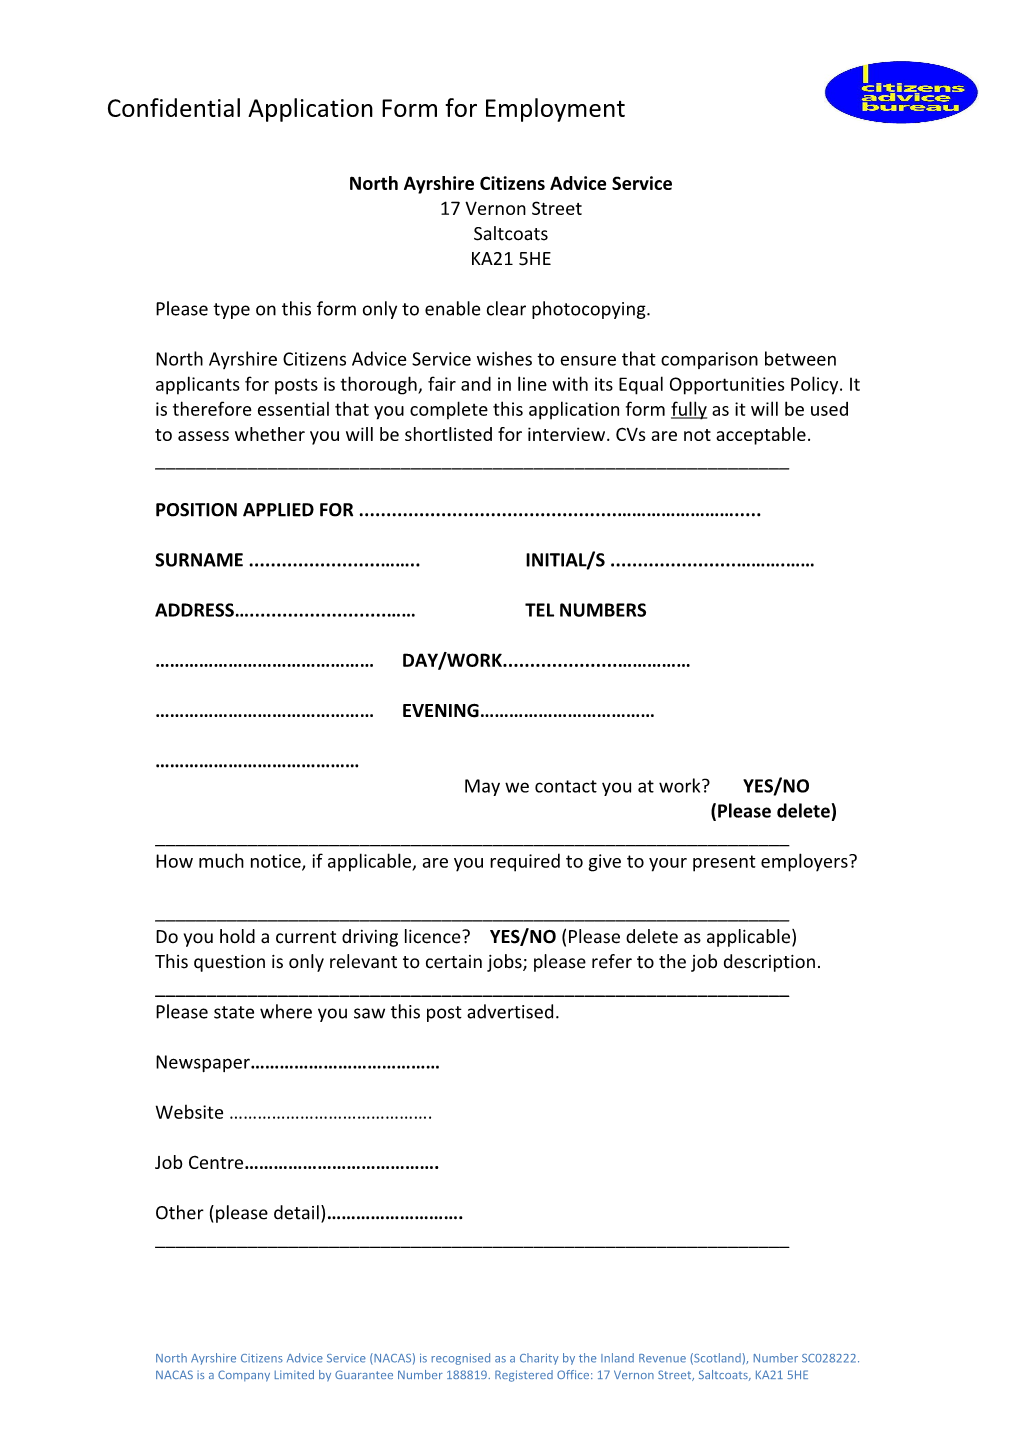 Confidential Application Form for Employment